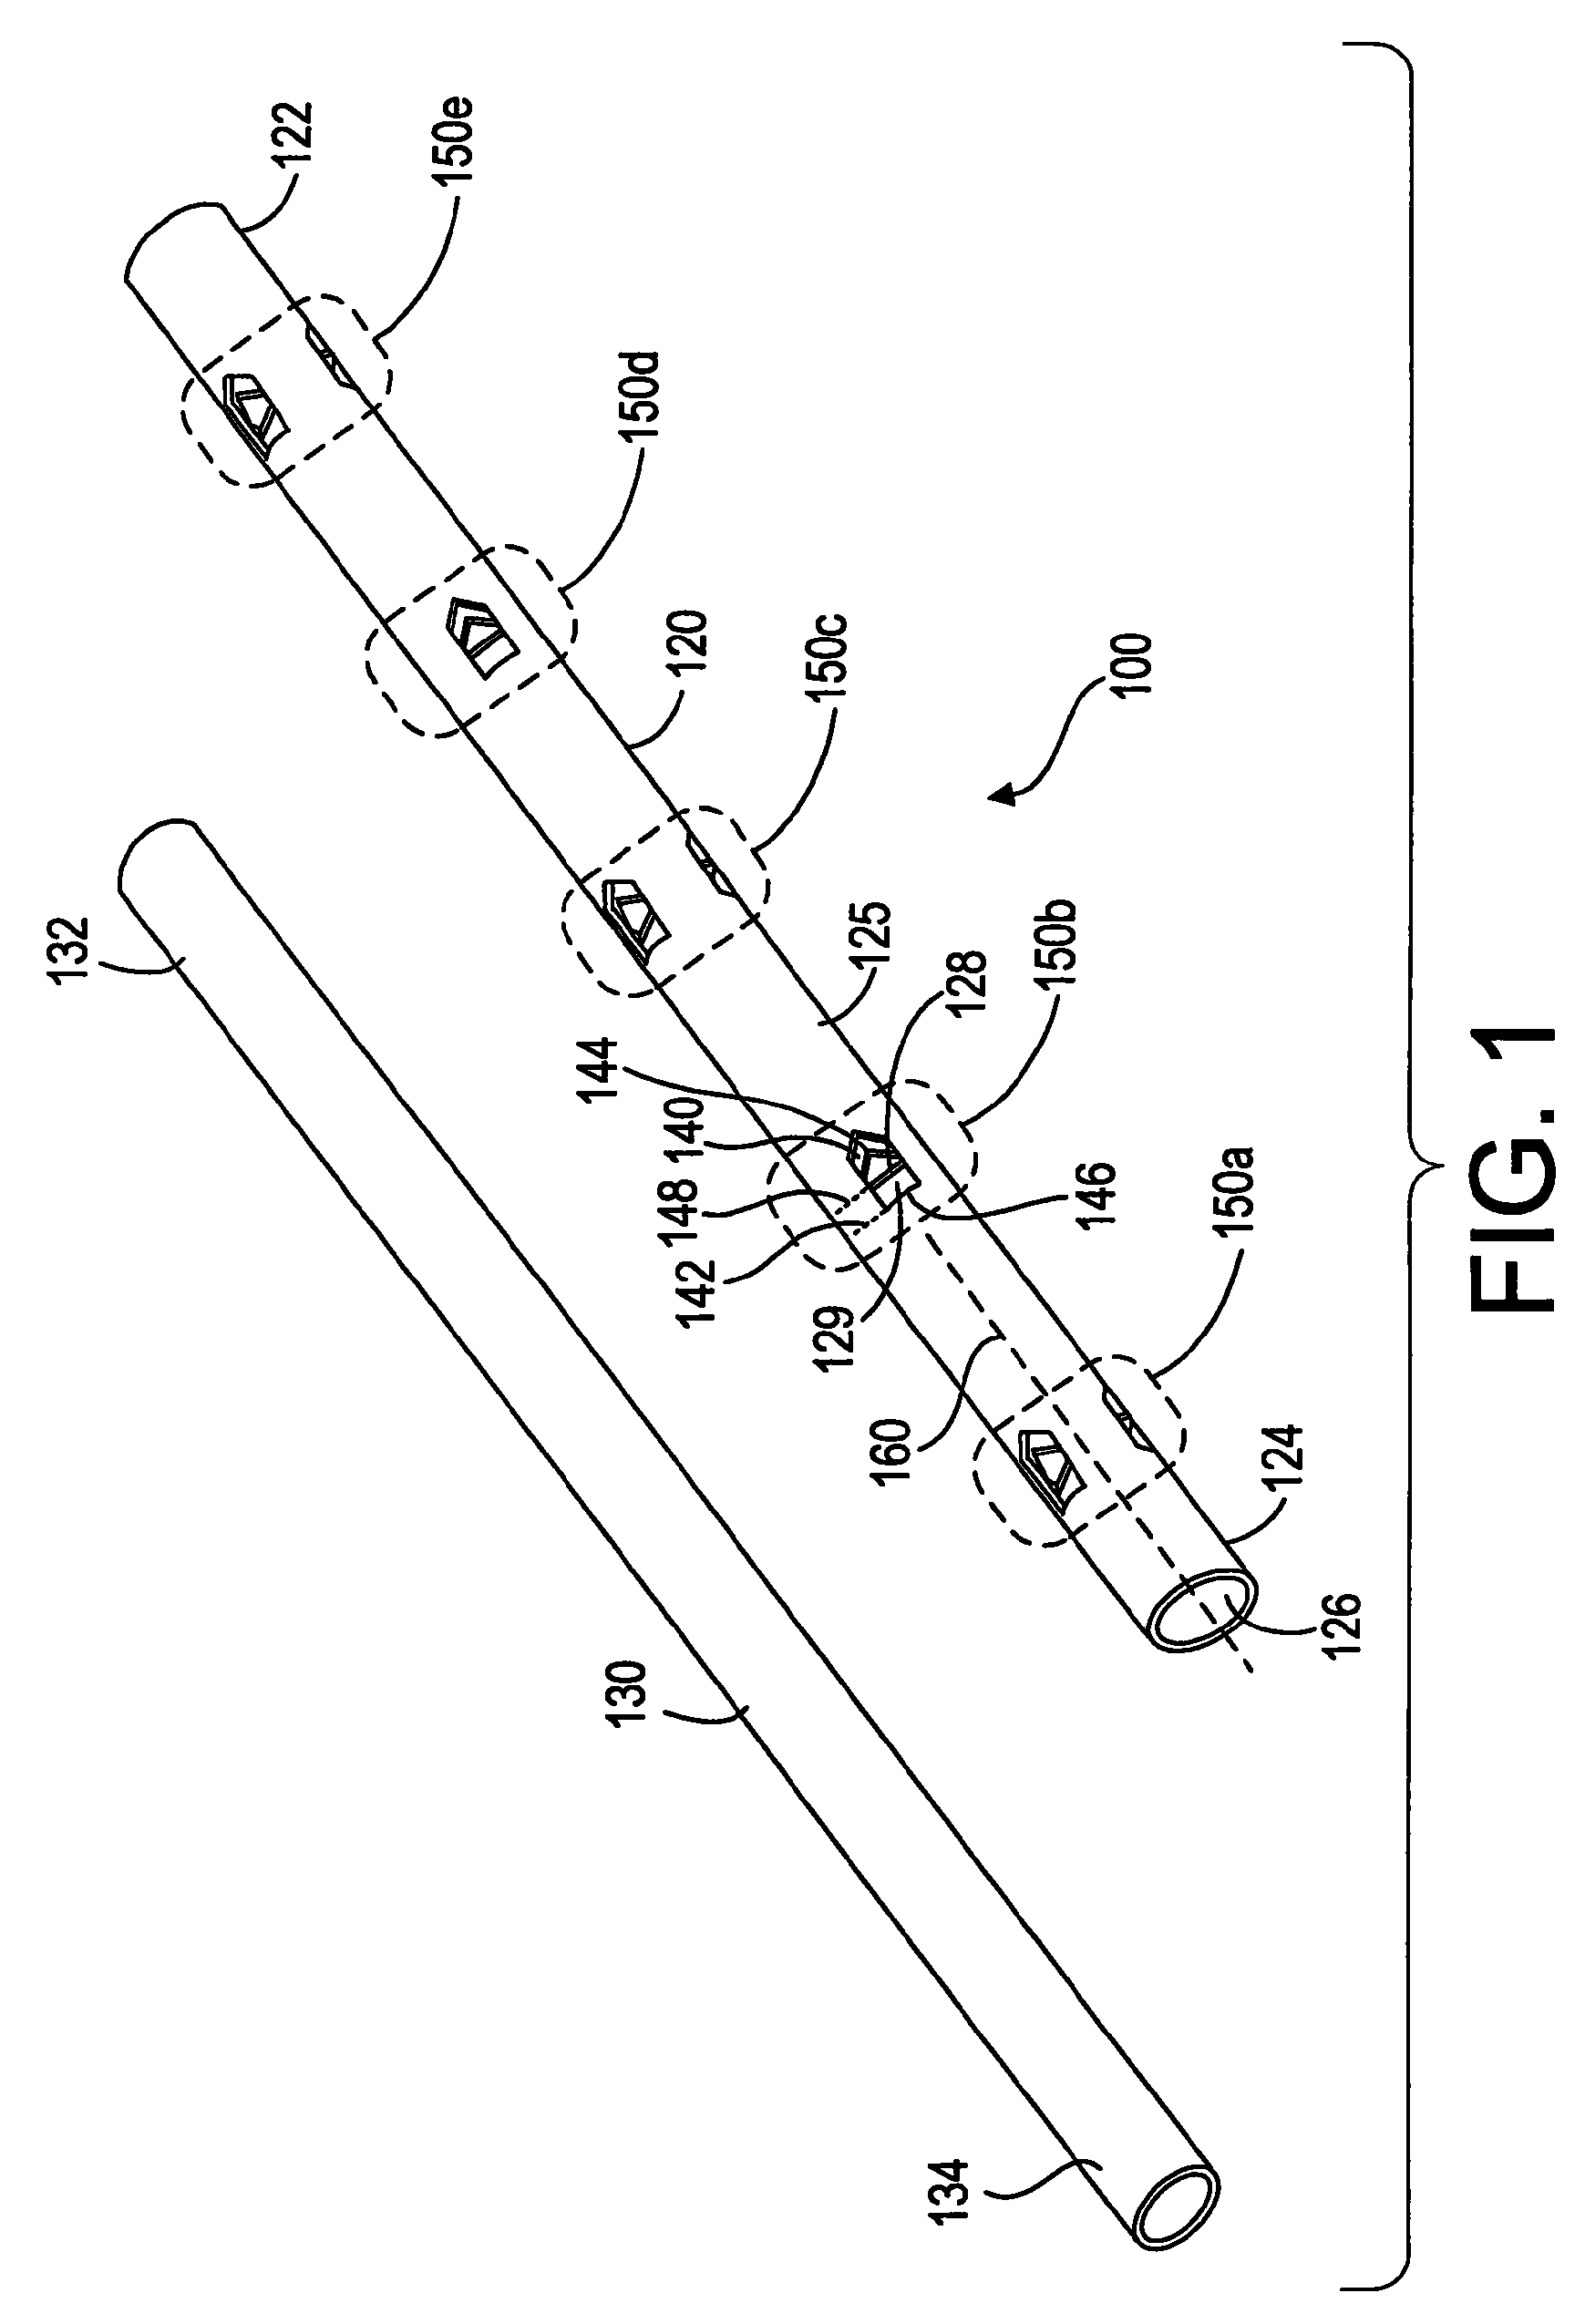 Bone fracture treatment devices and methods of their use